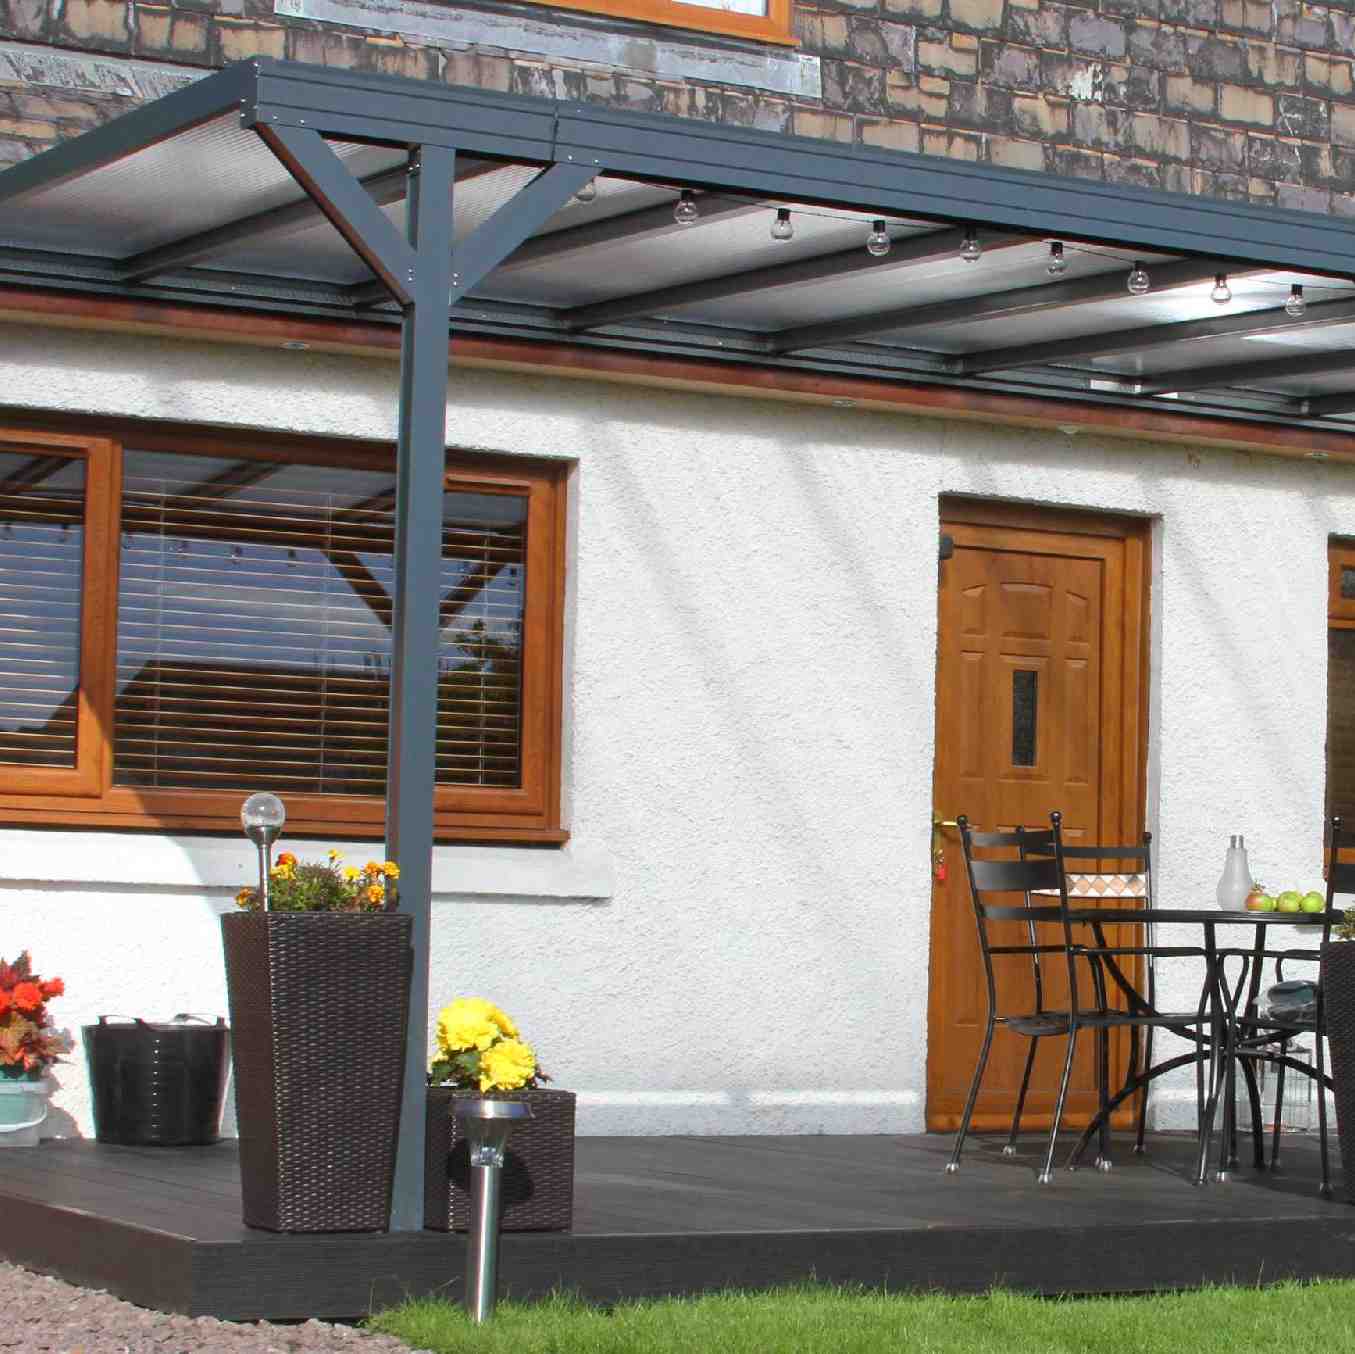 Omega Verandah, Anthracite Grey, 6mm Glass Clear Plate Polycarbonate Glazing - 7.7m (W) x 3.0m (P), (4) Supporting Posts